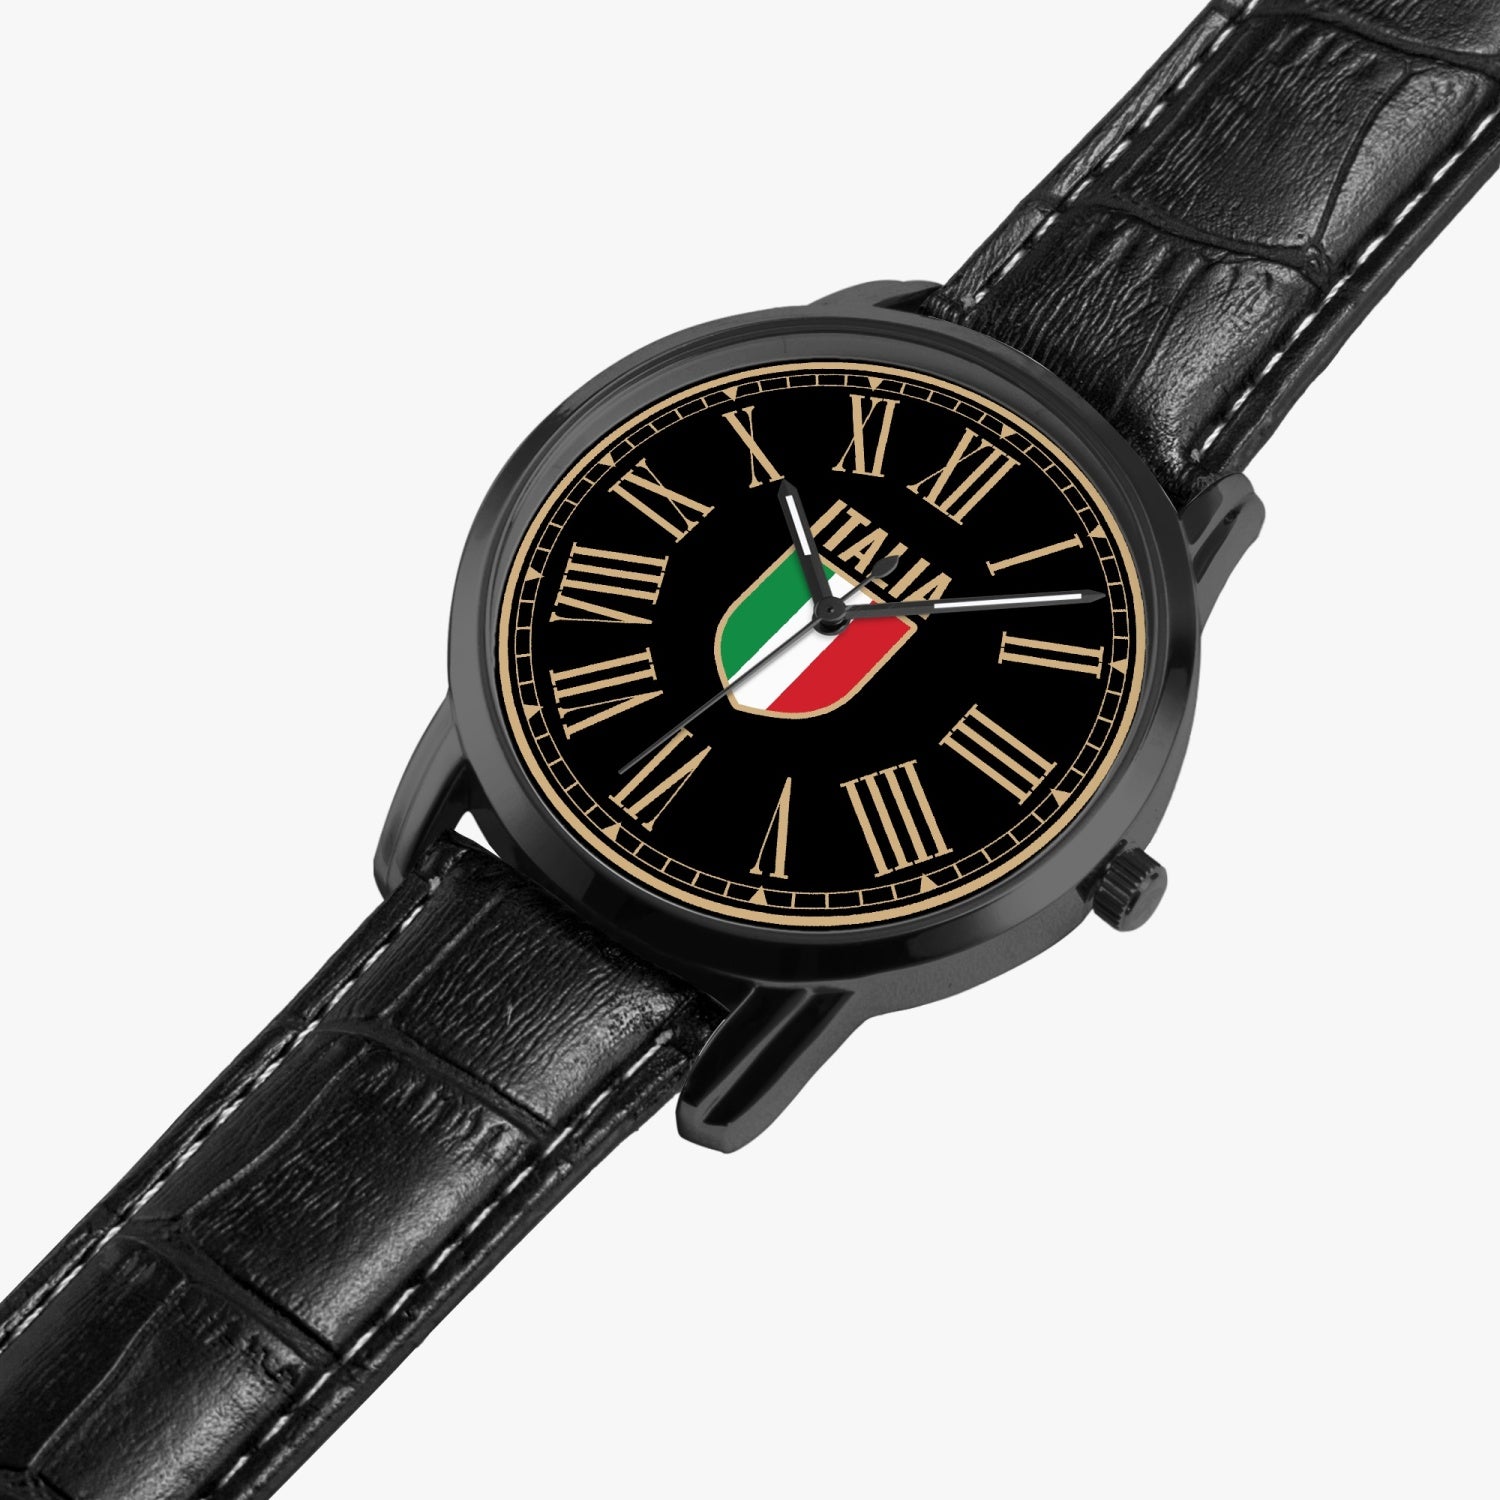 Italian Watches: The Made in Italy brands are on the rise.